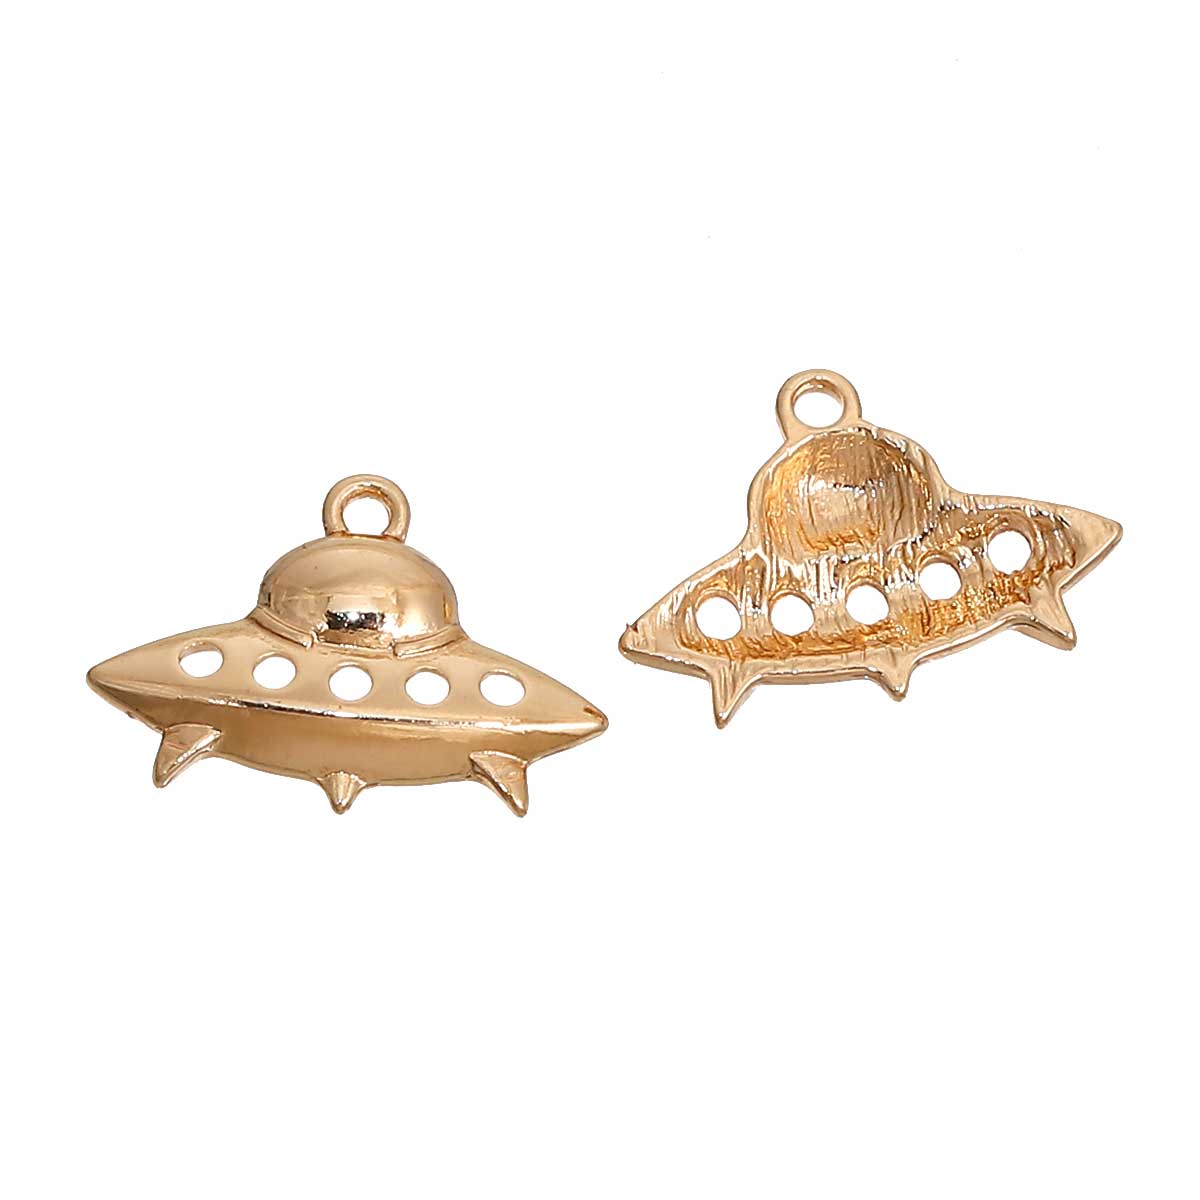 Picture of Zinc Based Alloy Galaxy Charms Spaceship Gold Plated 22mm( 7/8") x 16mm( 5/8"), 5 PCs